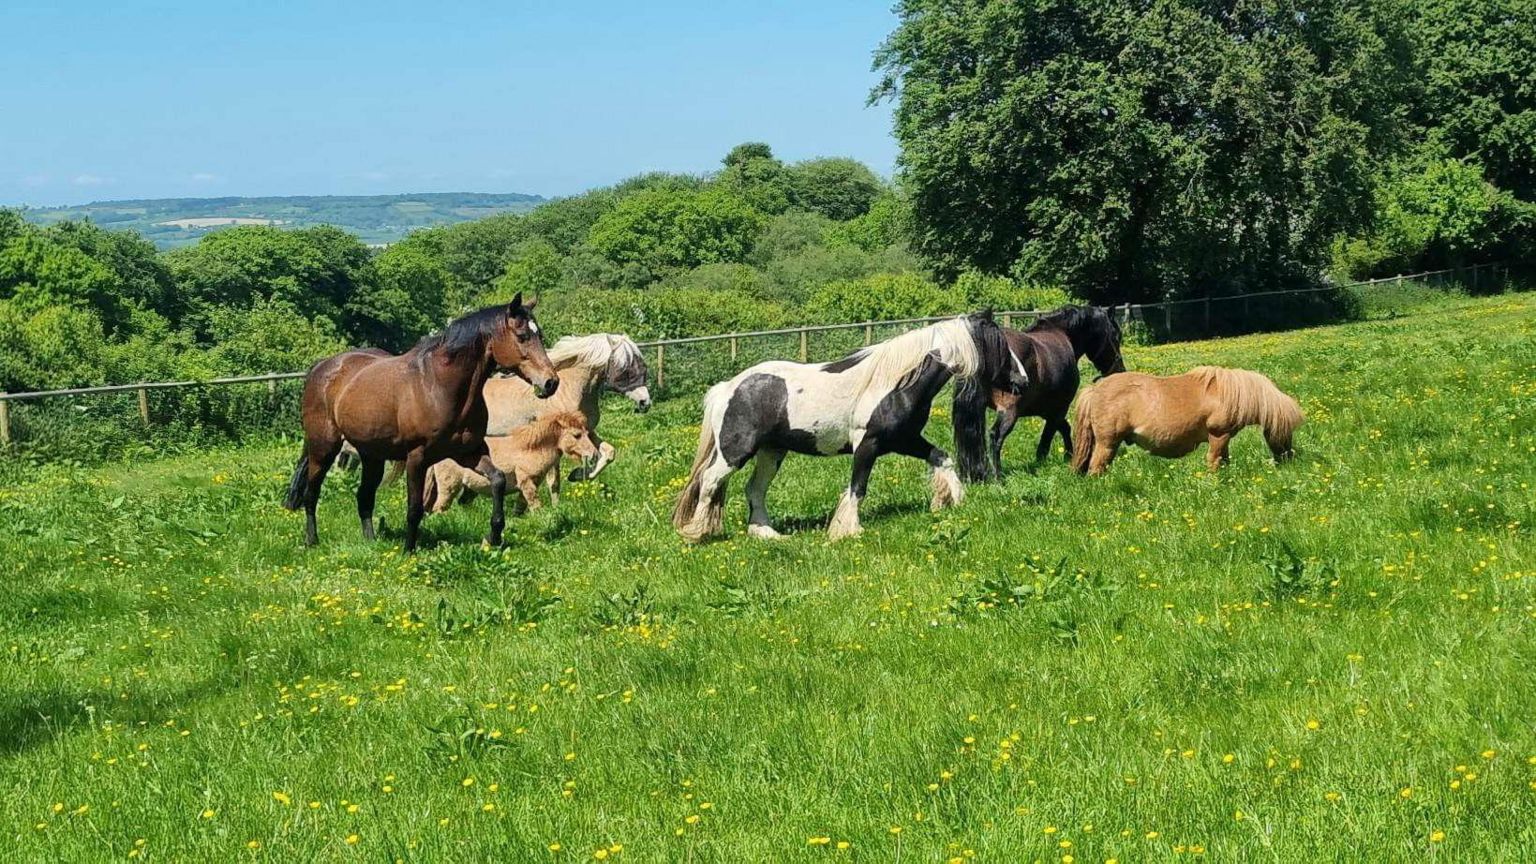 A herd of horses playing in a field 